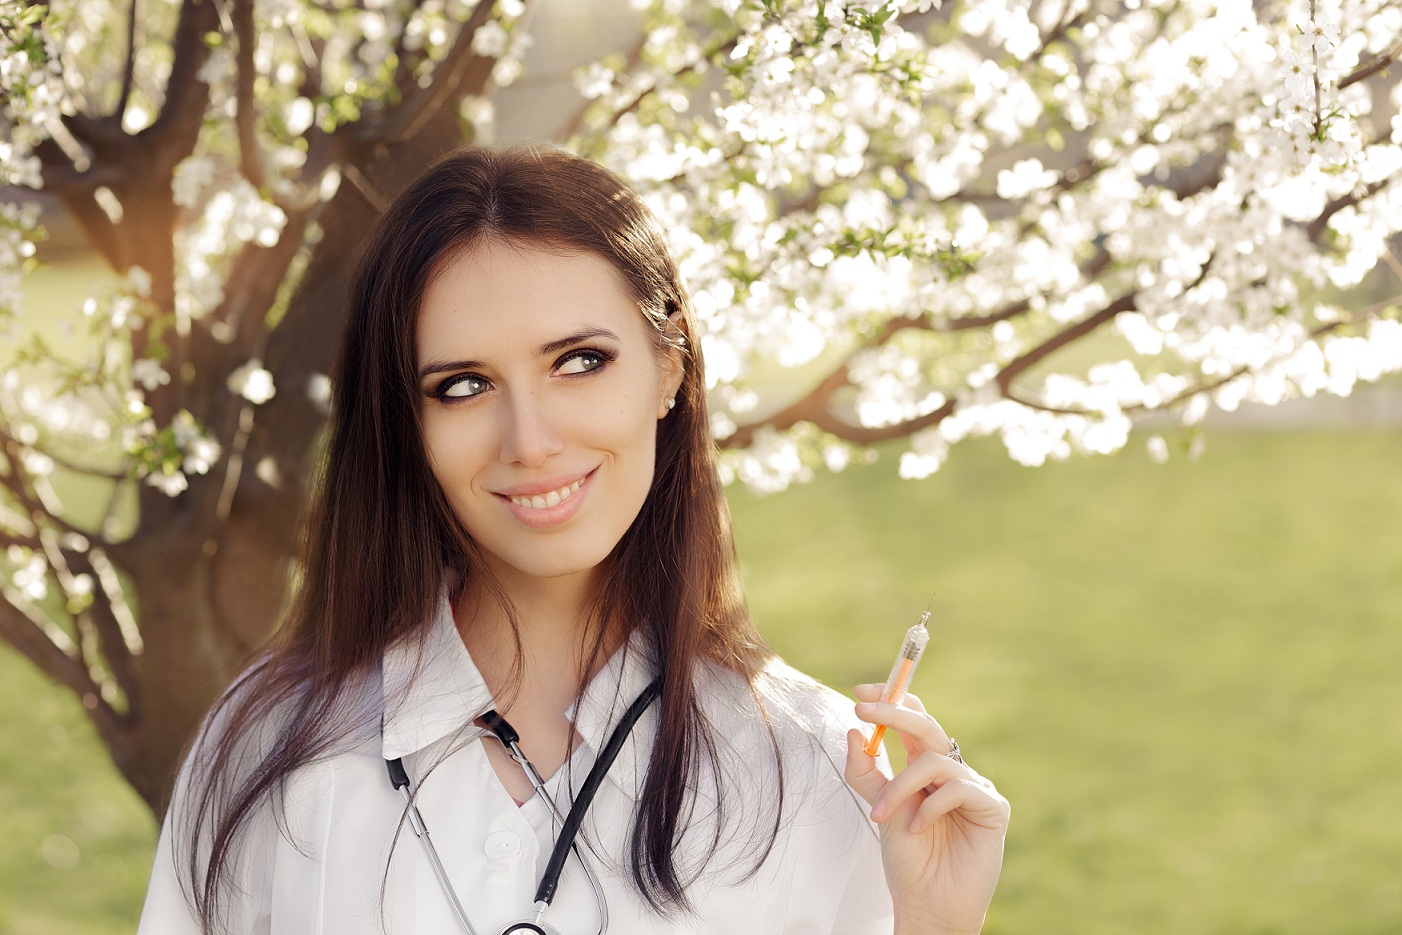 doctor holding a syringe next to a tree